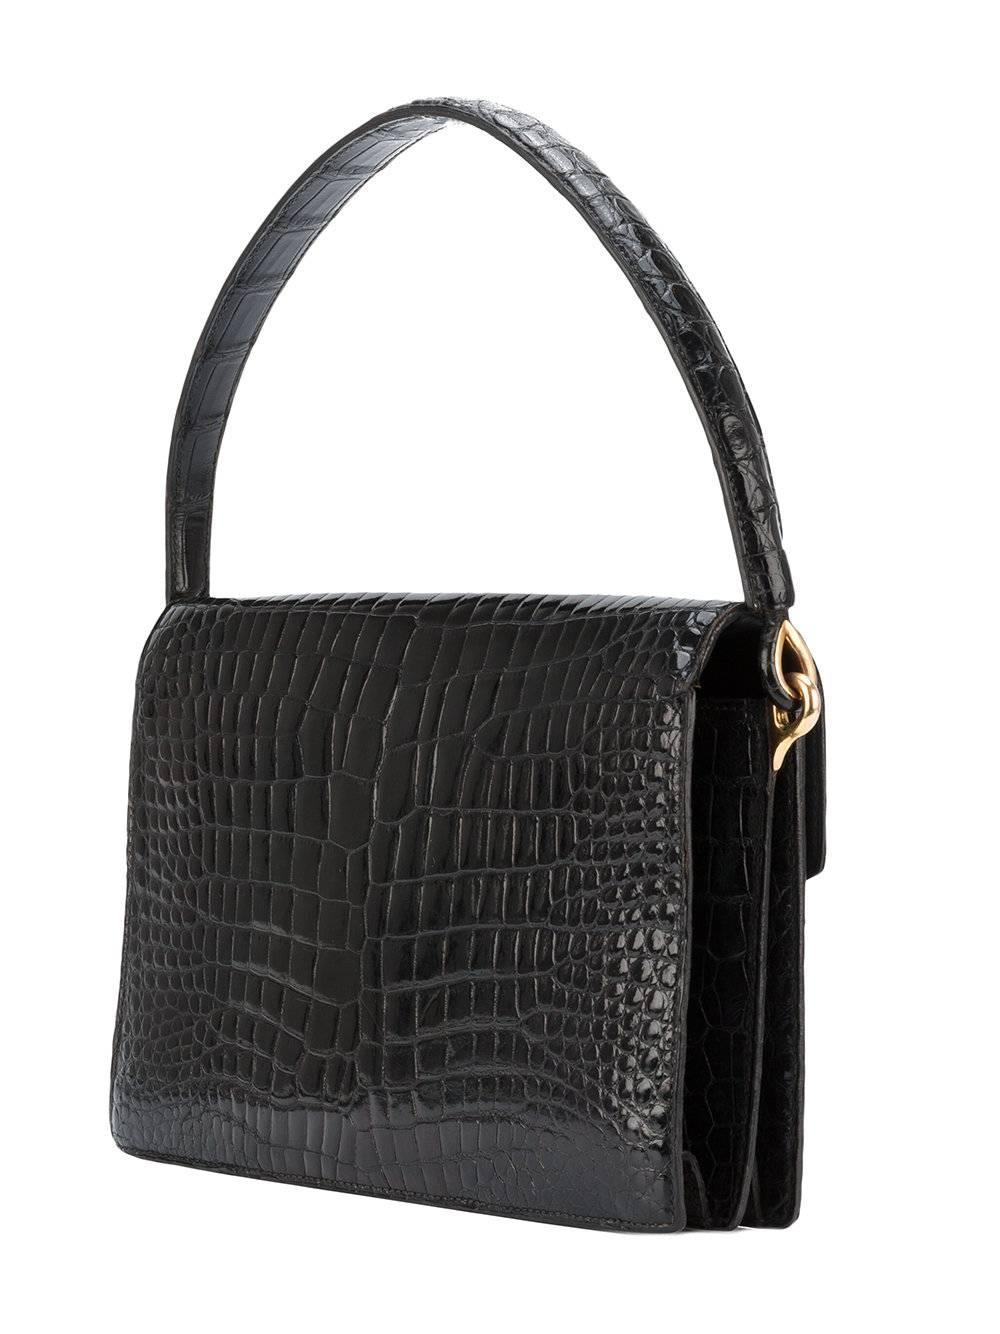 A timeless must-have, the perfect french elegance!!! Divine quality of black crocodile leather. Magnificent Hermes black crocodile leather bag of the 60s. The 'Cordeau' model. Excellent condition. Exceptional black crocodile leather. gold hardware